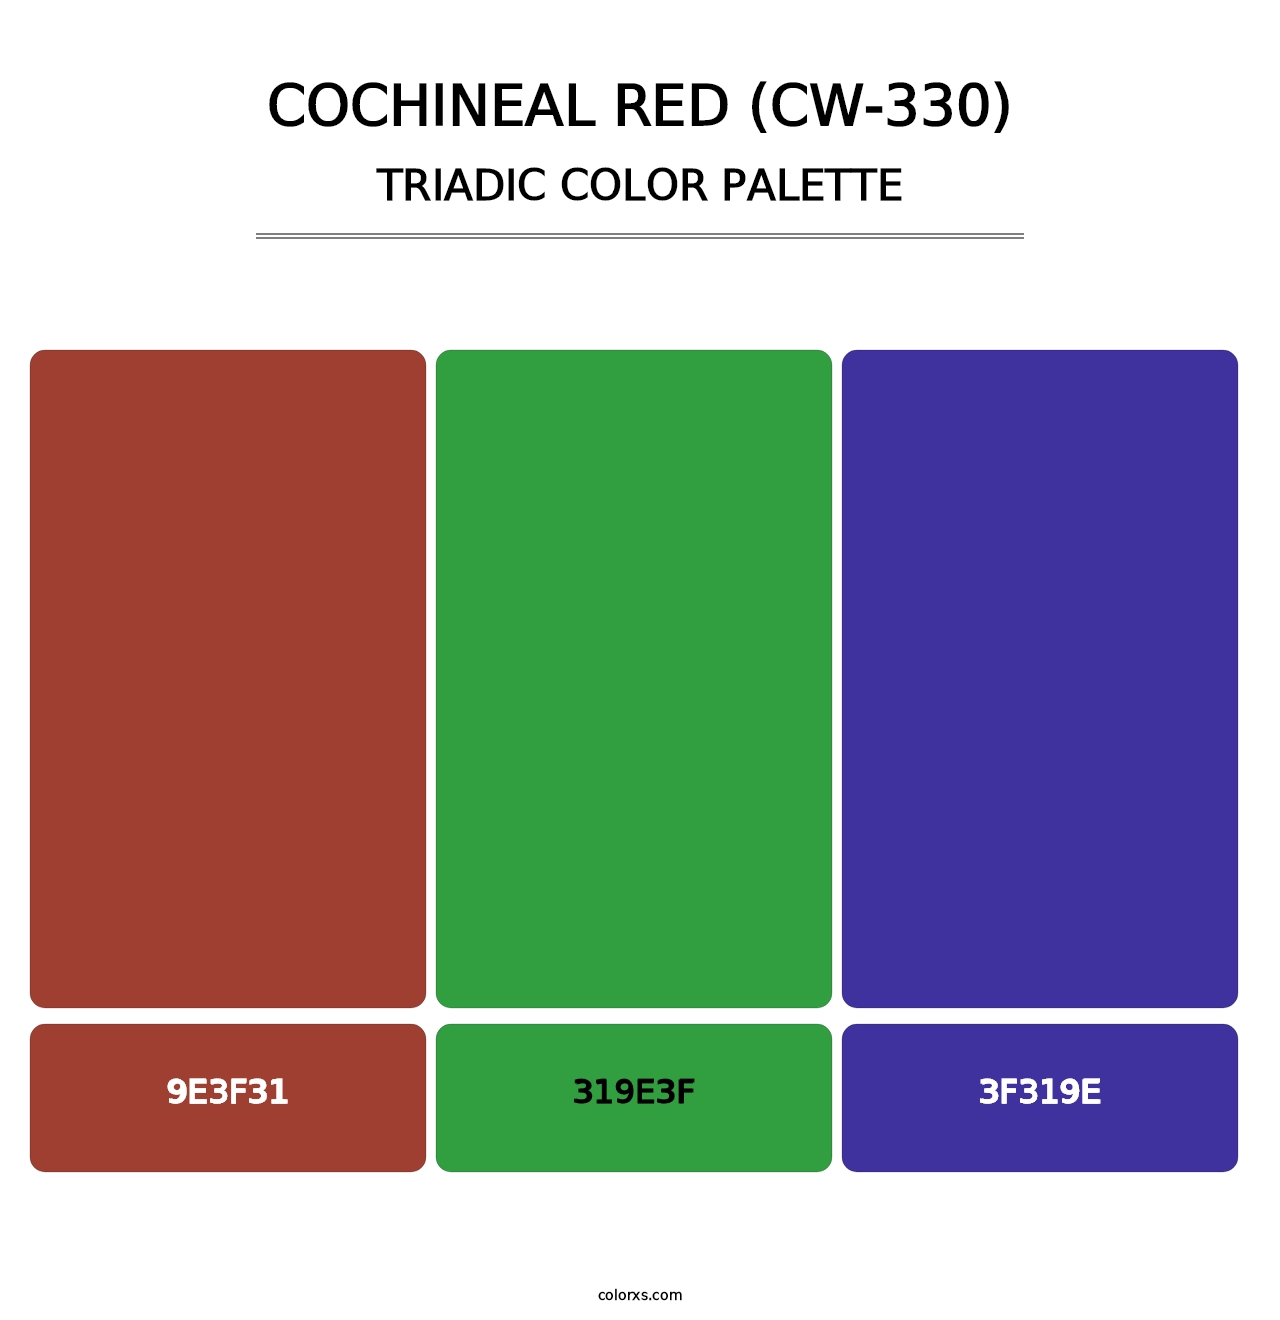 Cochineal Red (CW-330) - Triadic Color Palette